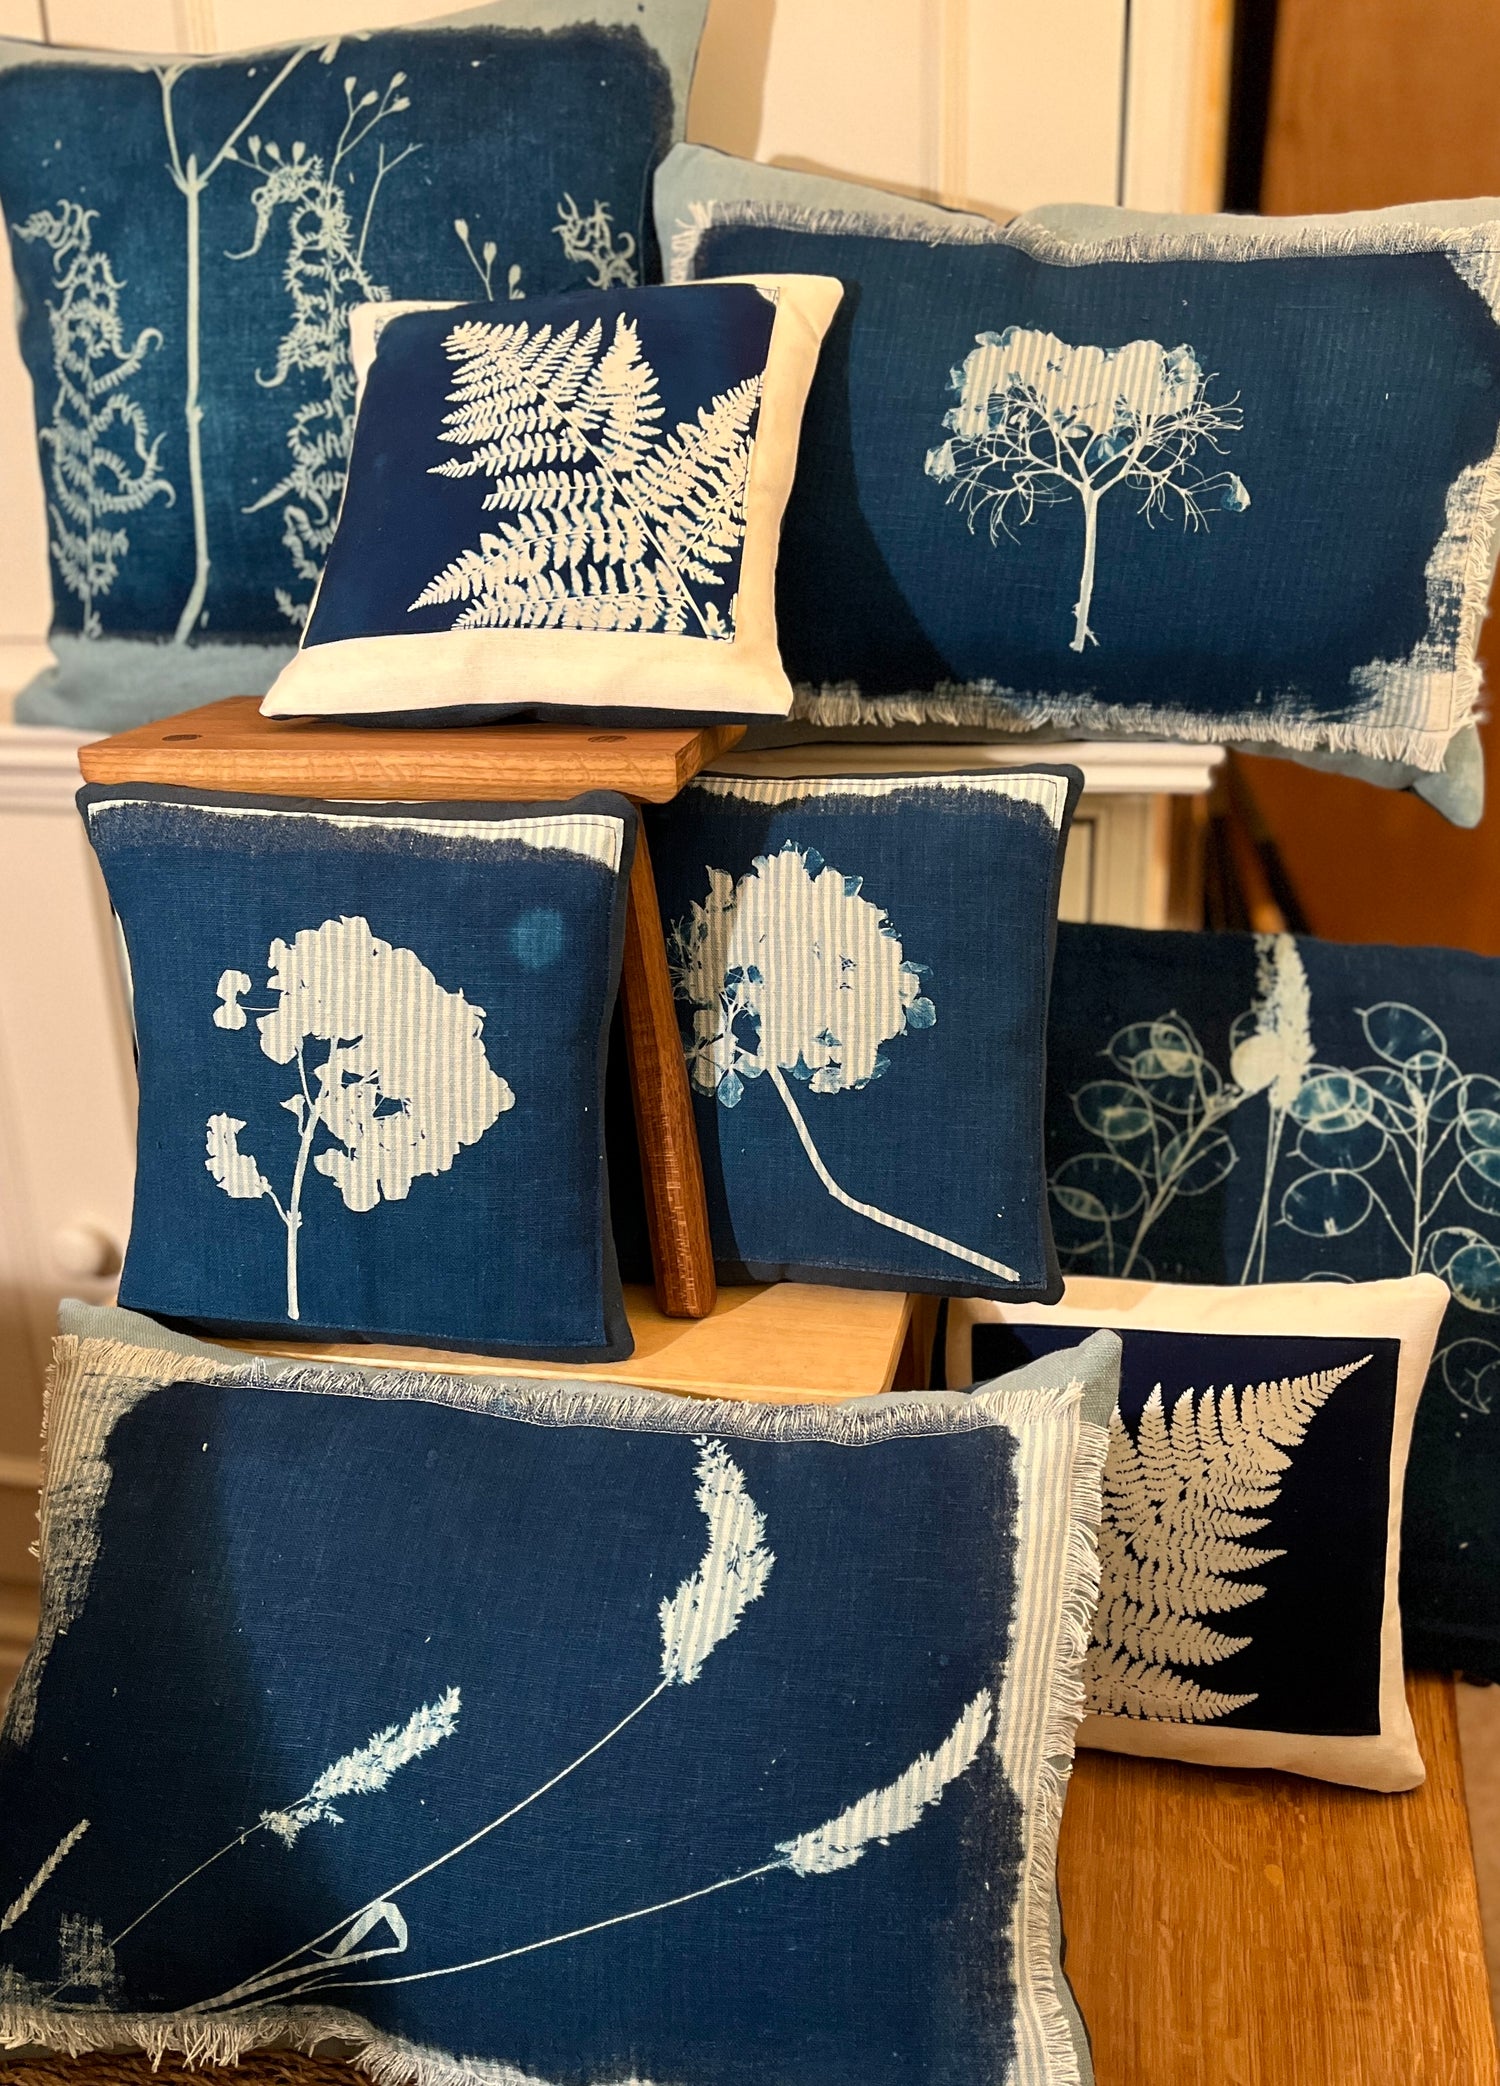 <p>A unique handmade cushion featuring original cyanotype print. Each cyanotype piece is made individually by me so every one is an original. The cushion is in aqua and ivory striped linen.>